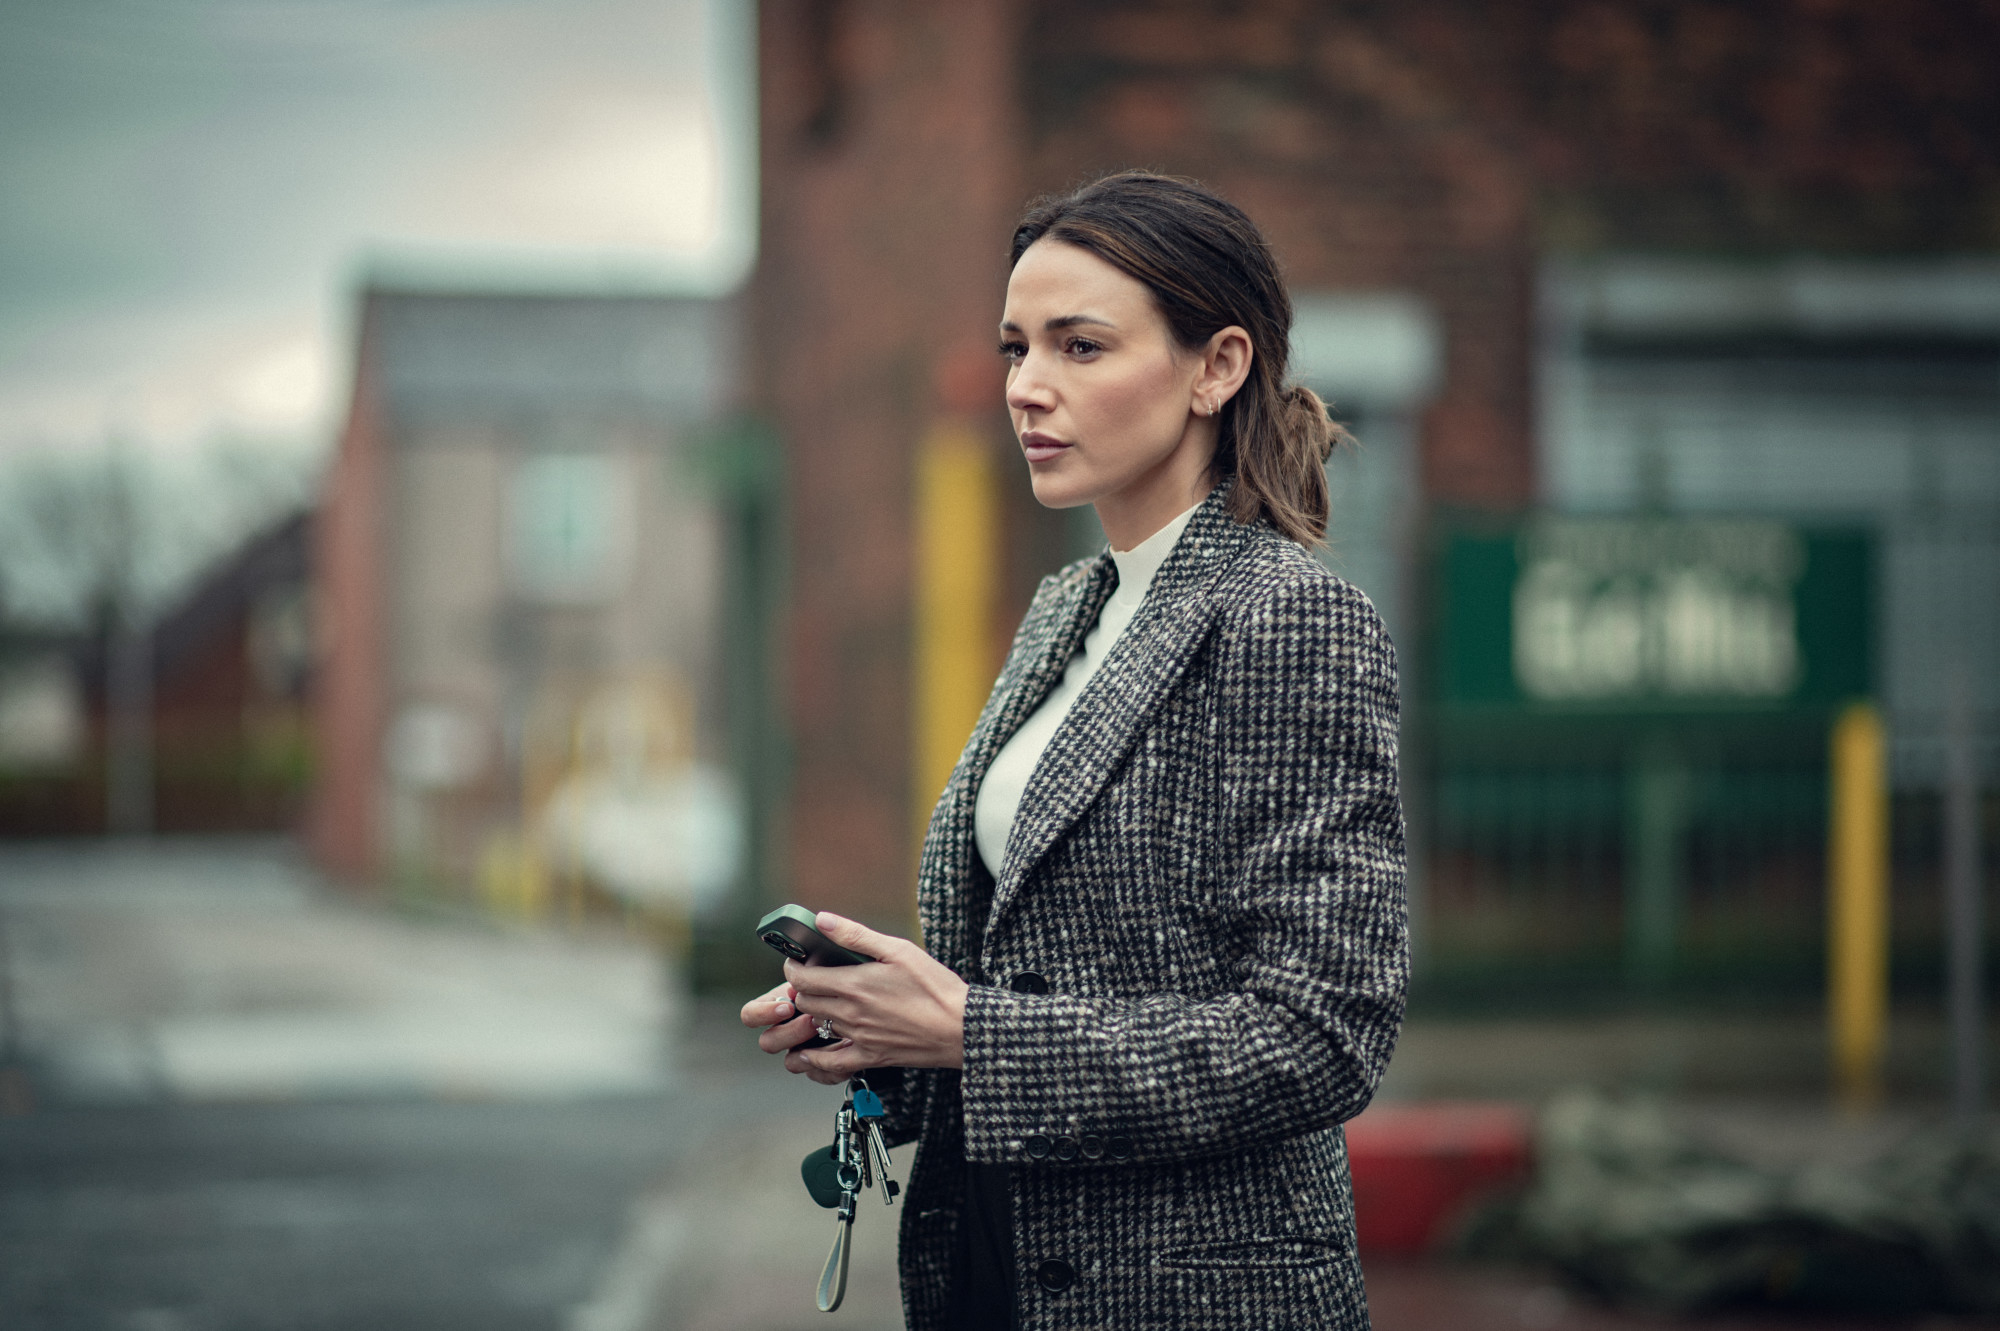 Woman in a tweed coat stands outdoors holding a phone with a focused expression